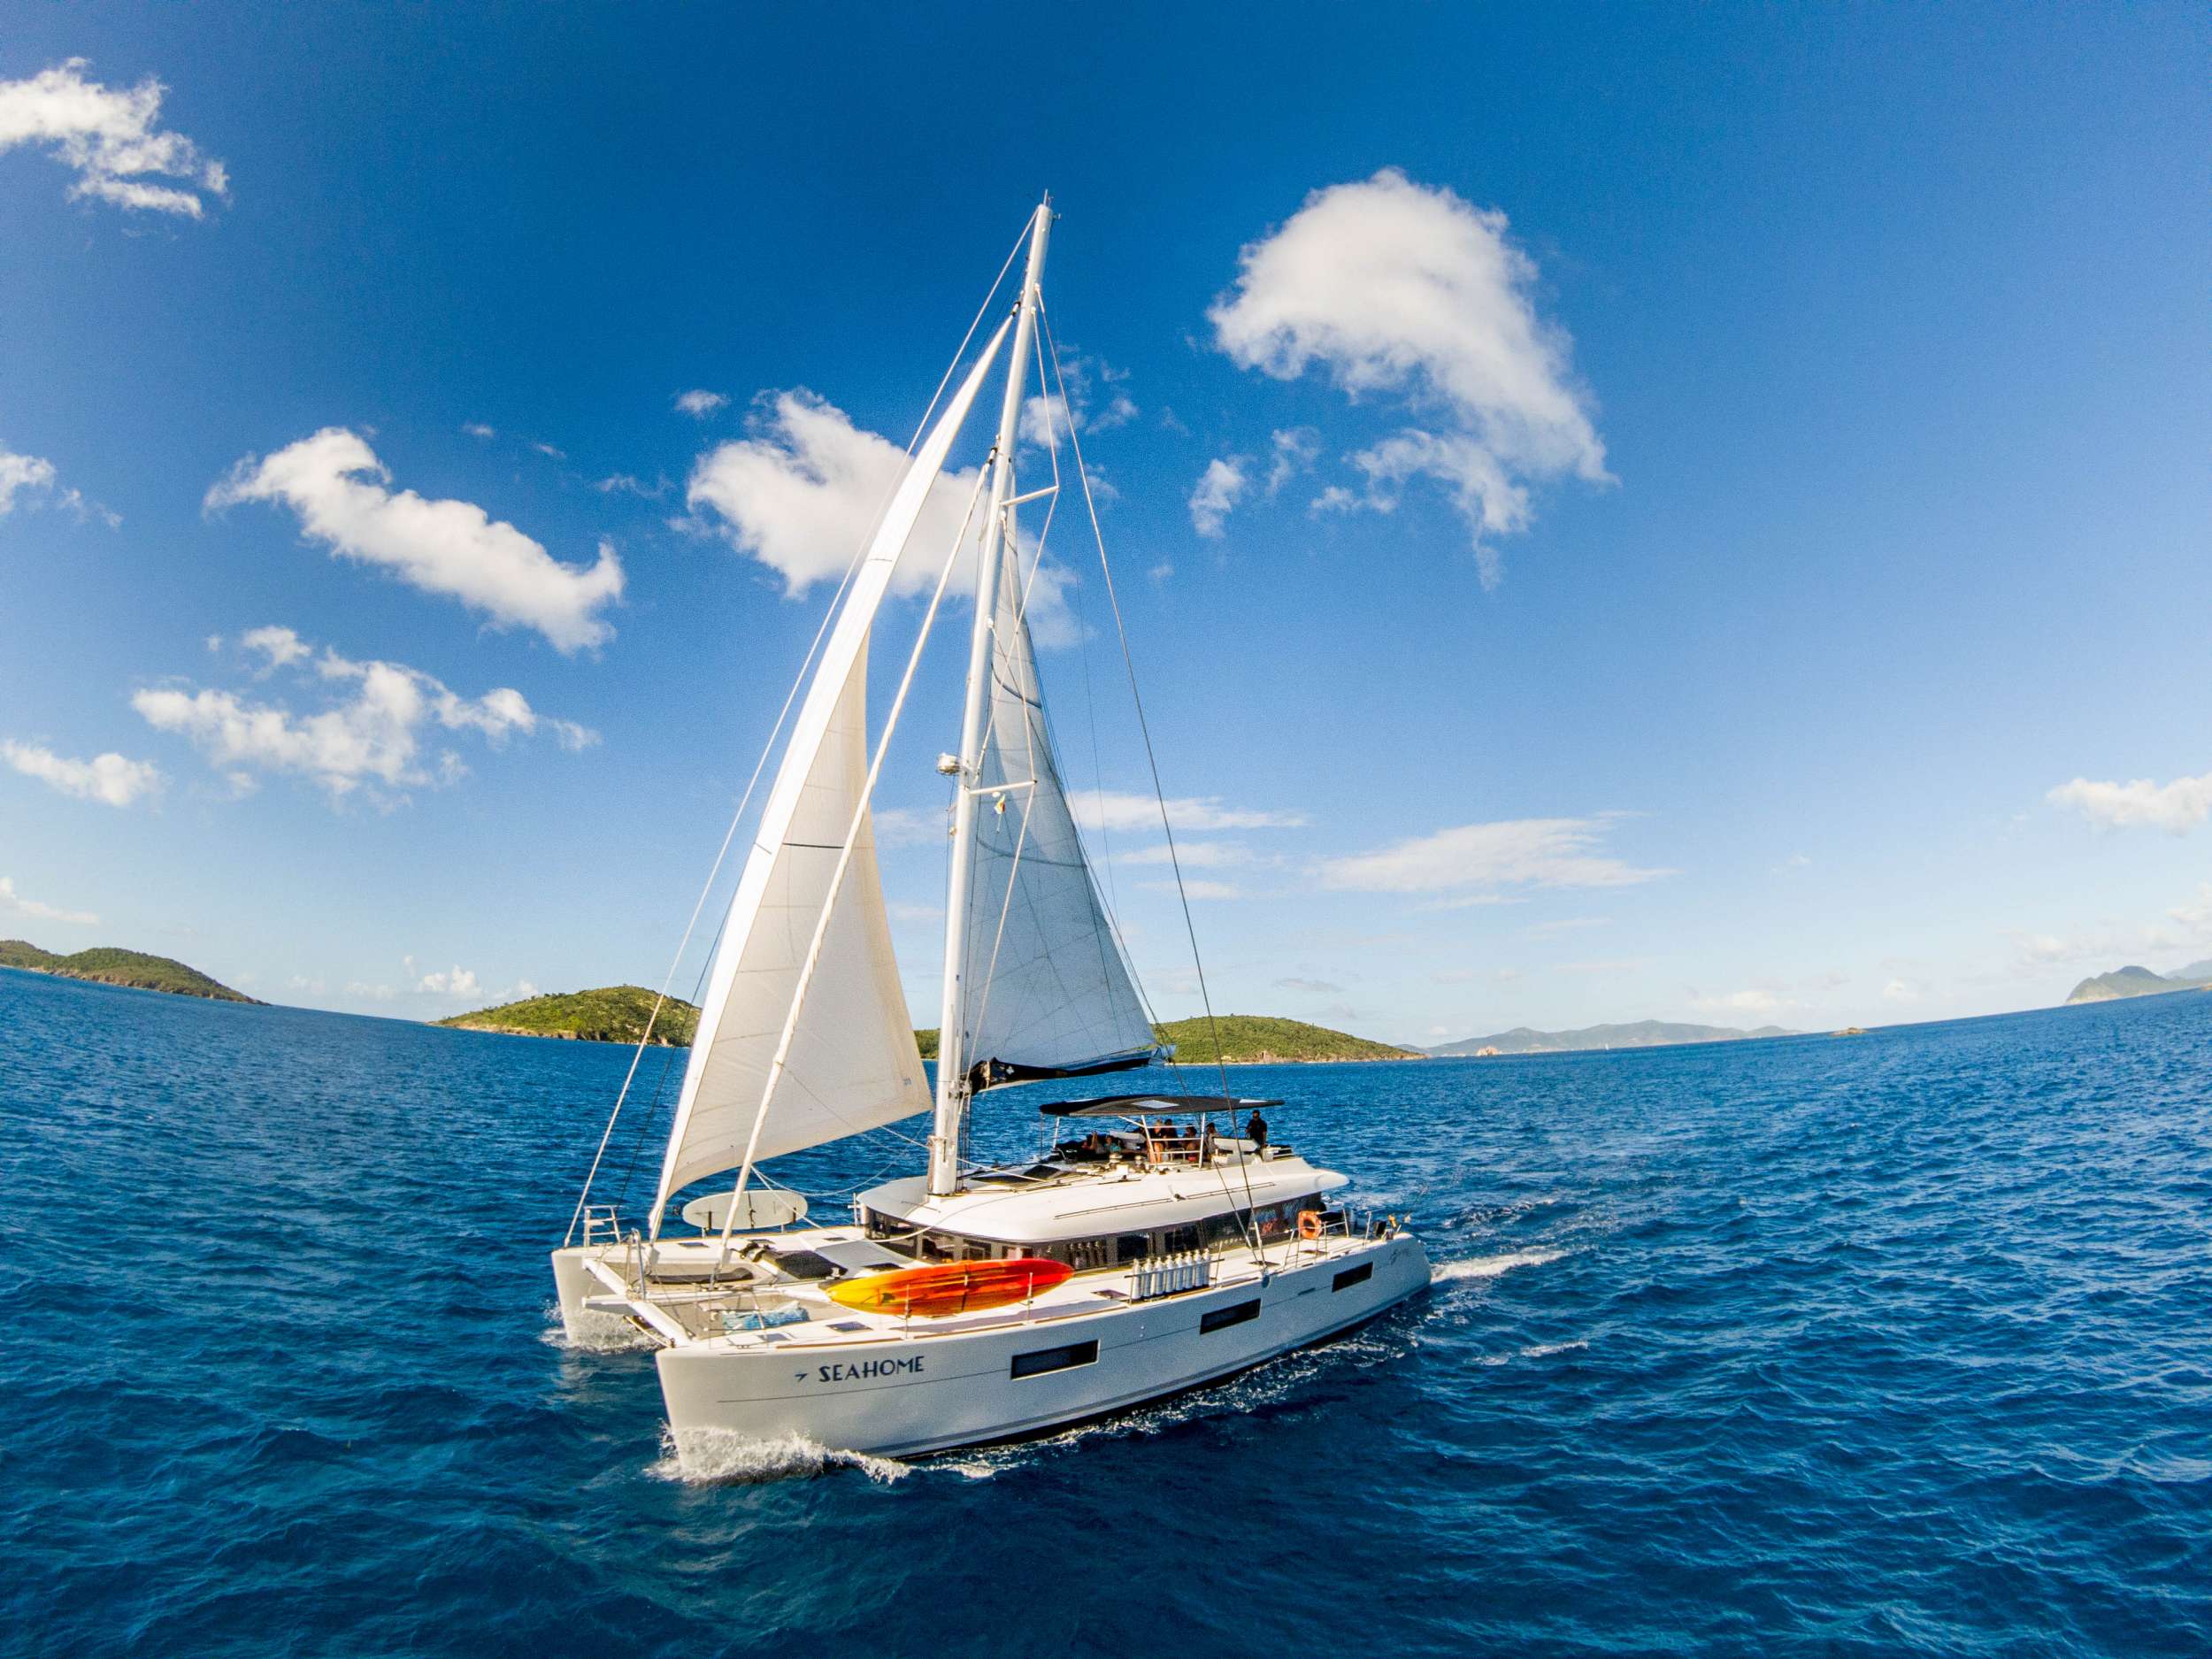 seahome - Yacht Charter Sea Cow Bay & Boat hire in Caribbean 1